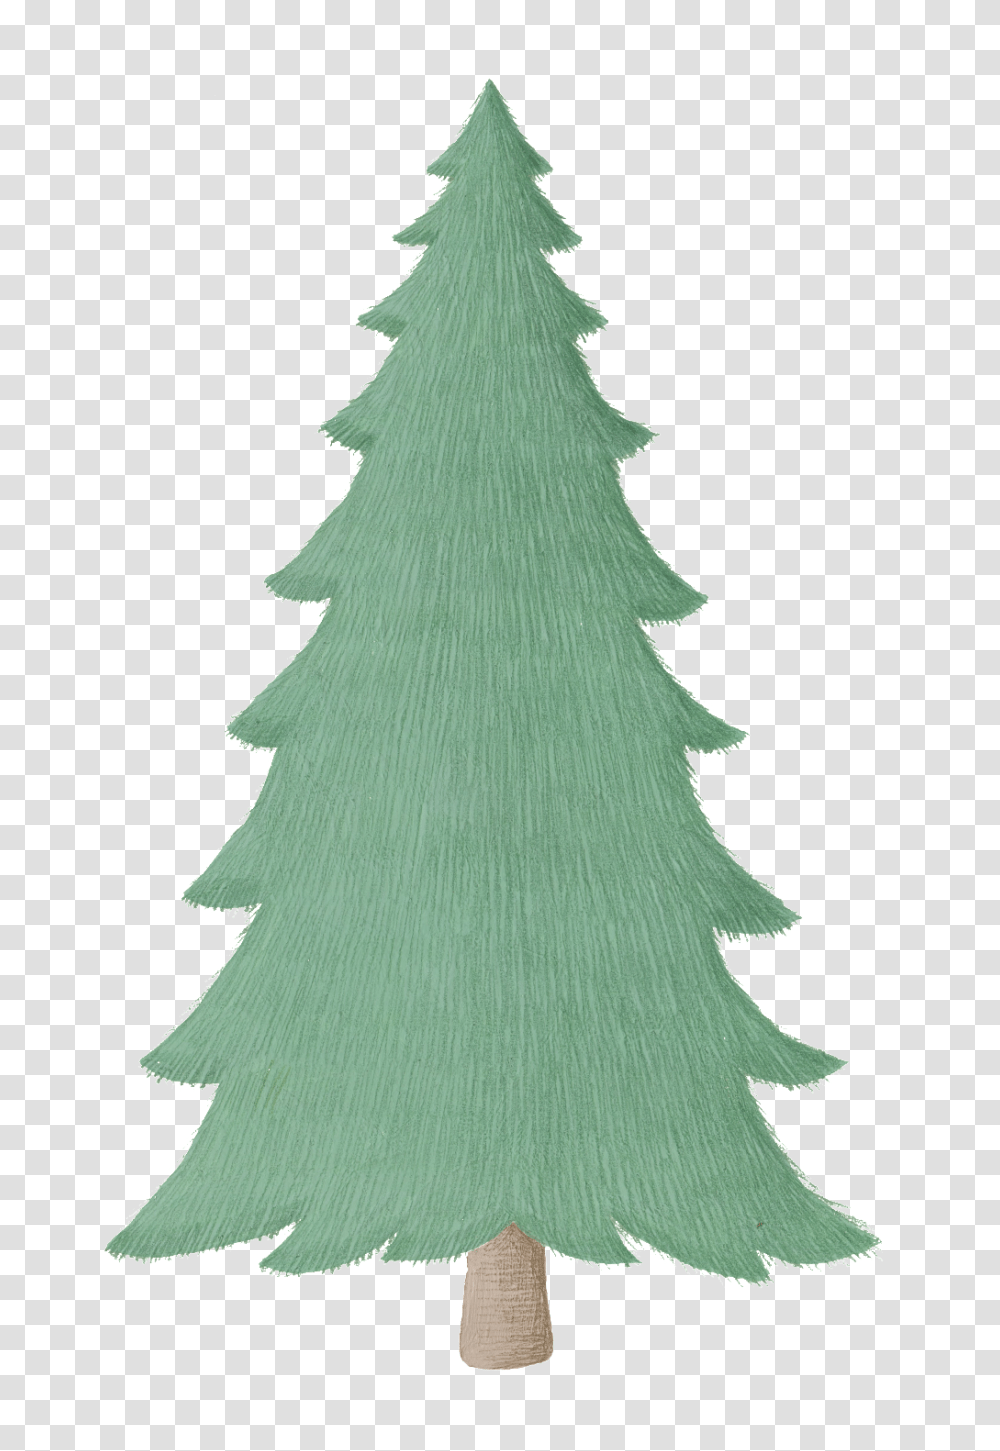 Cartoon Pine Tree Images Free Download Vector, Plant, Christmas Tree, Ornament Transparent Png